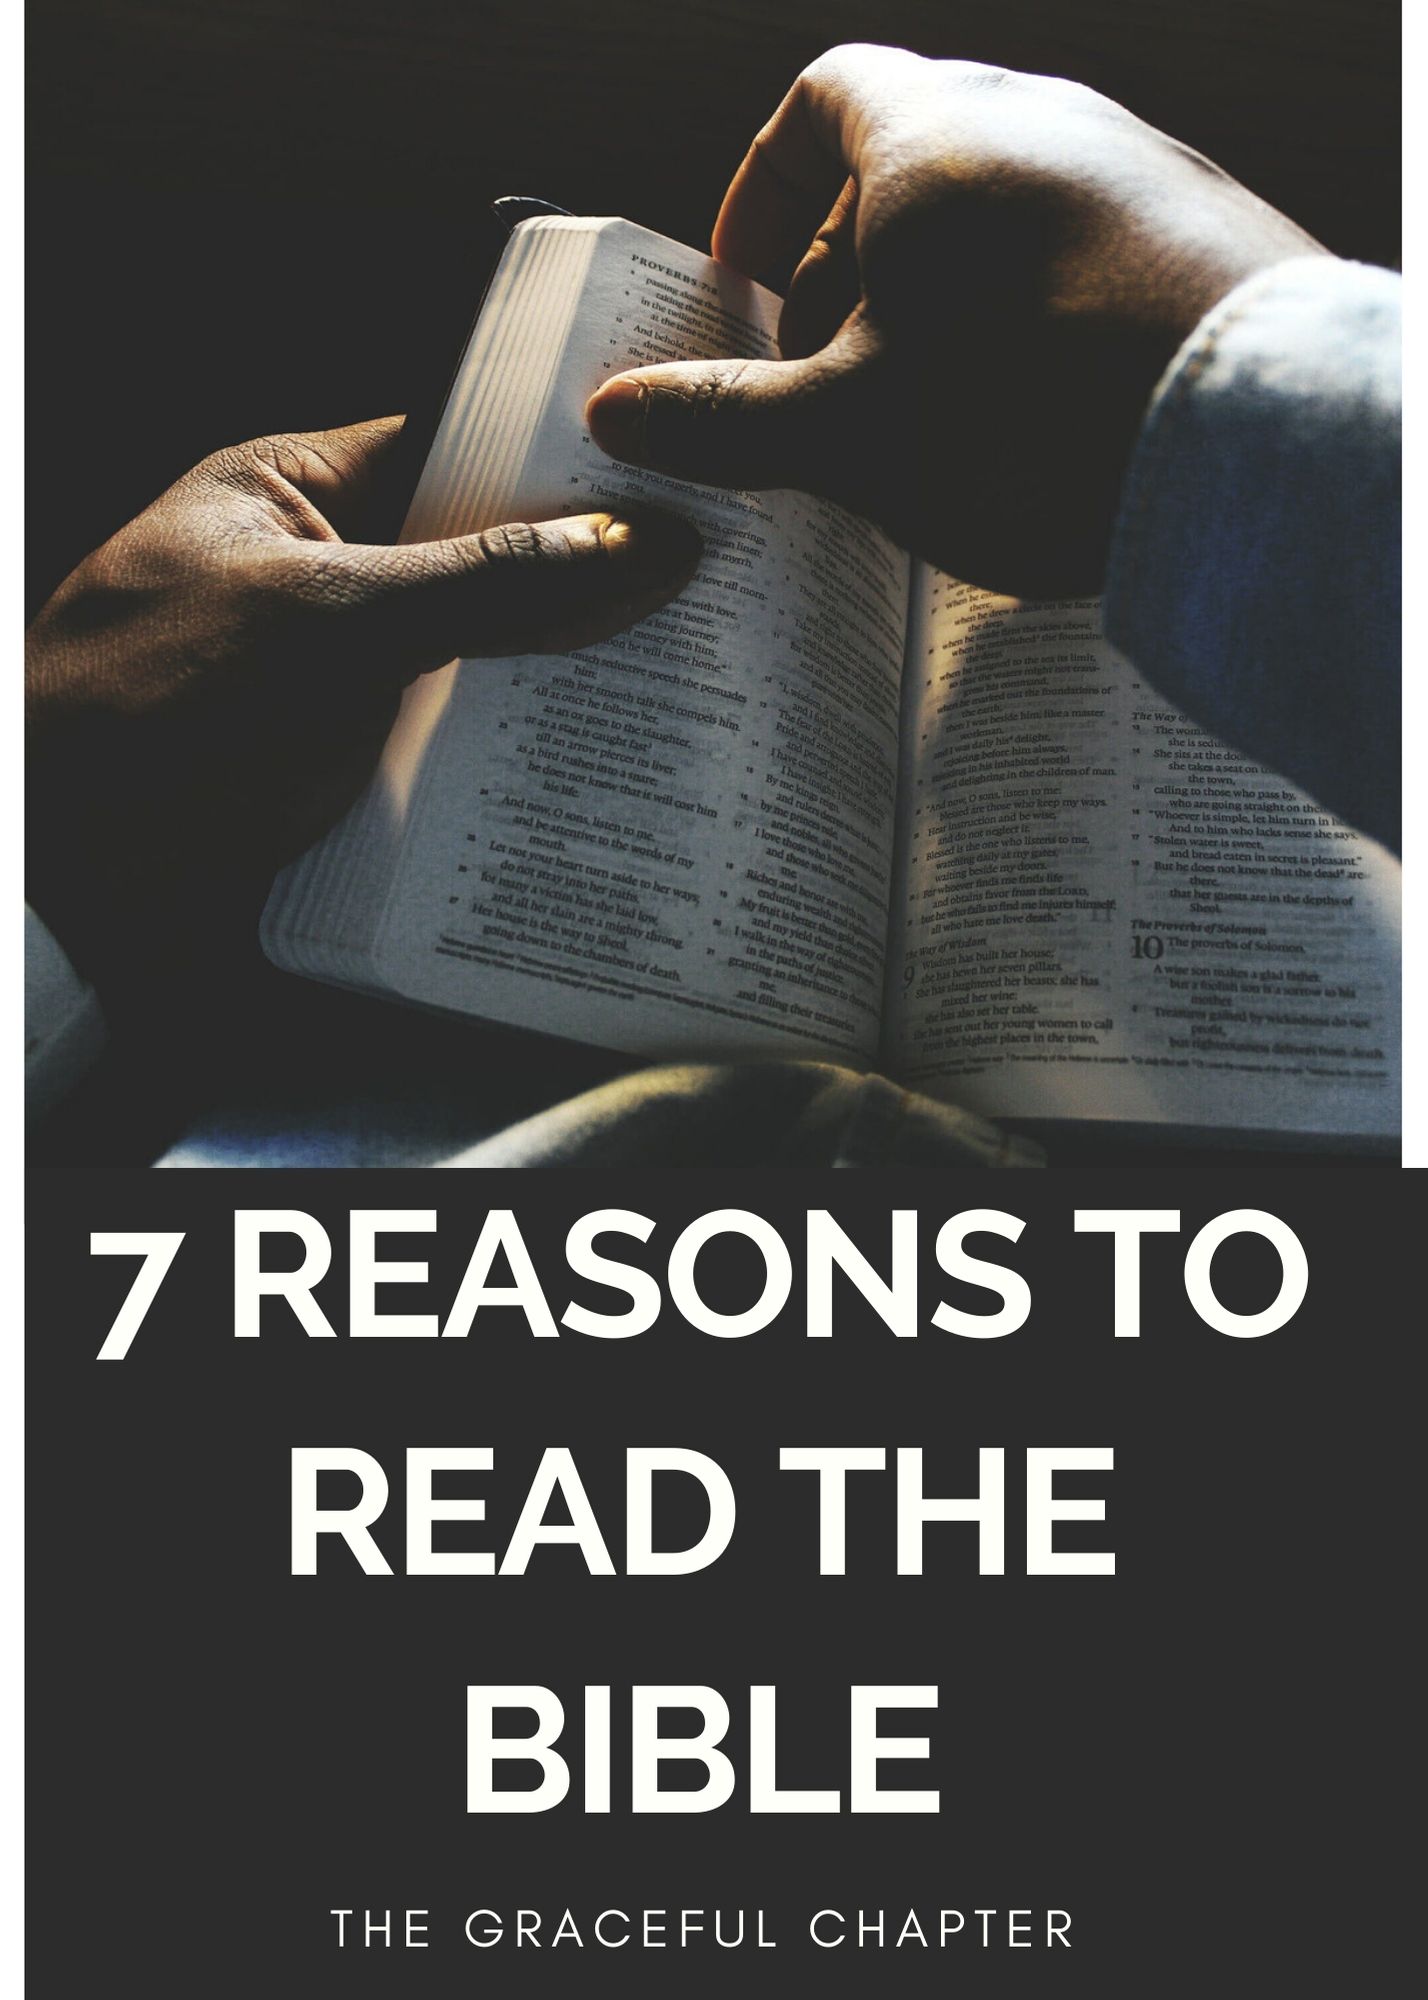 7 reasons to read the bible